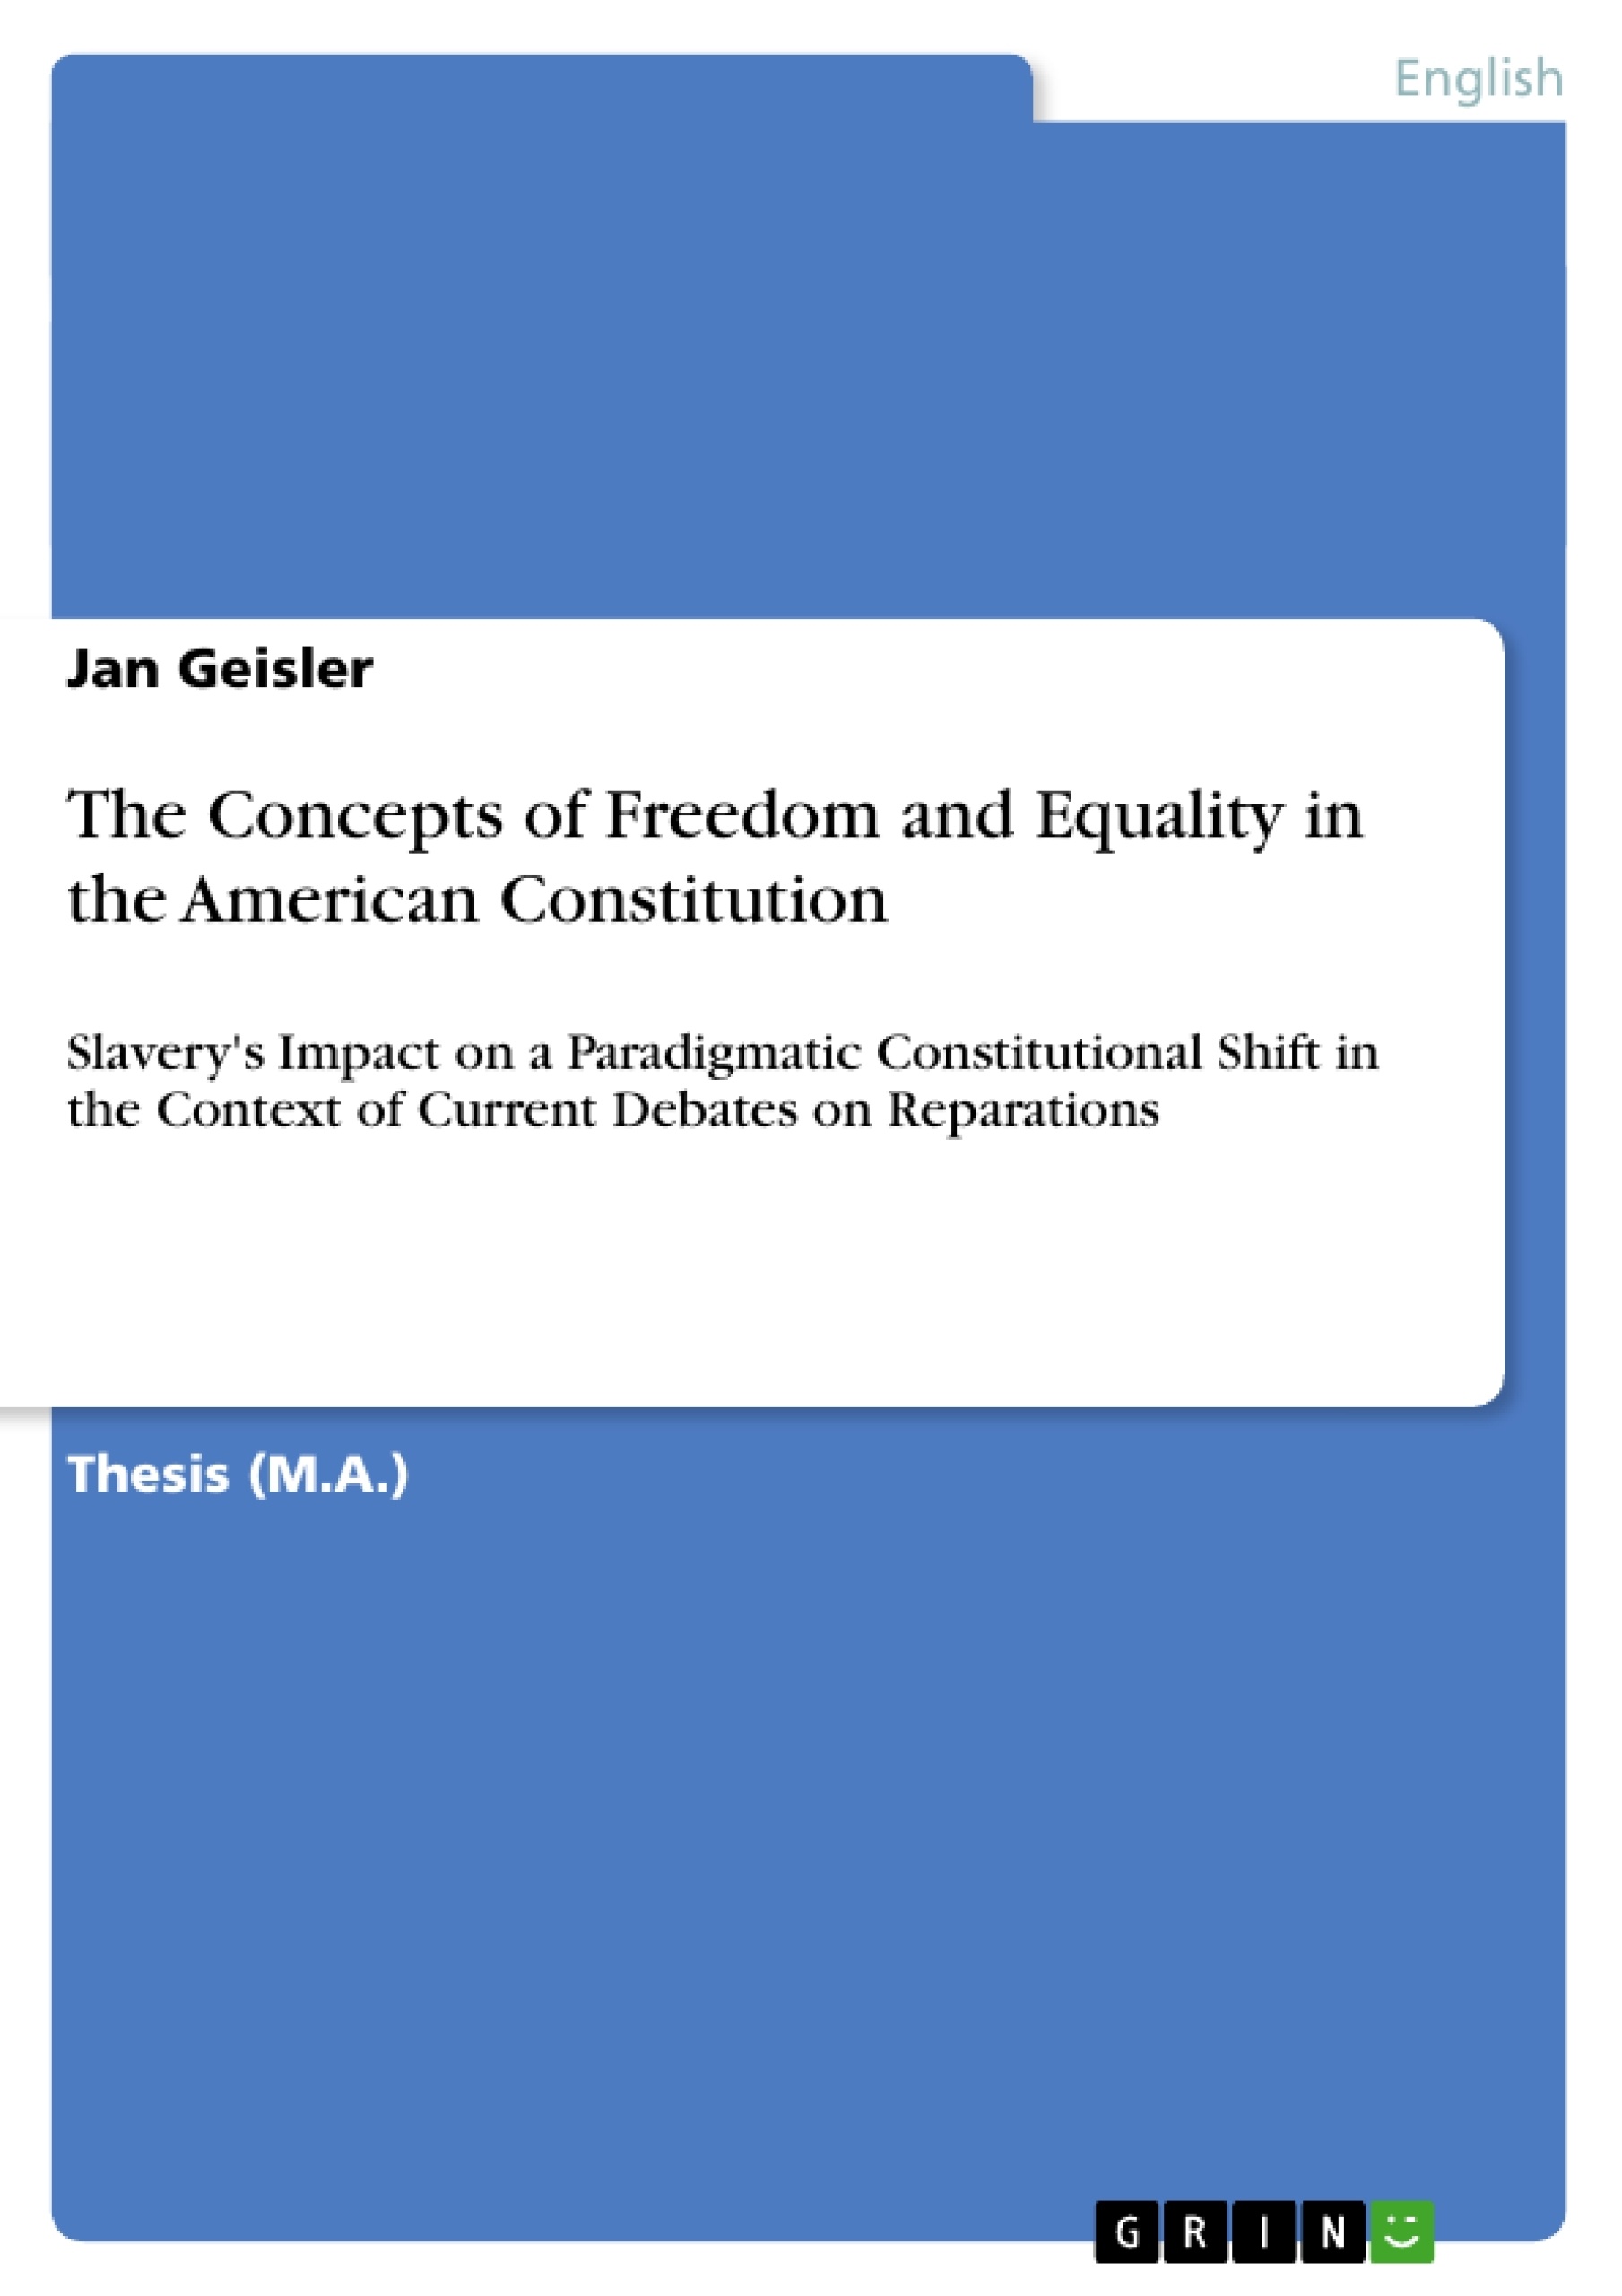 Title: The Concepts of Freedom and Equality in the American Constitution